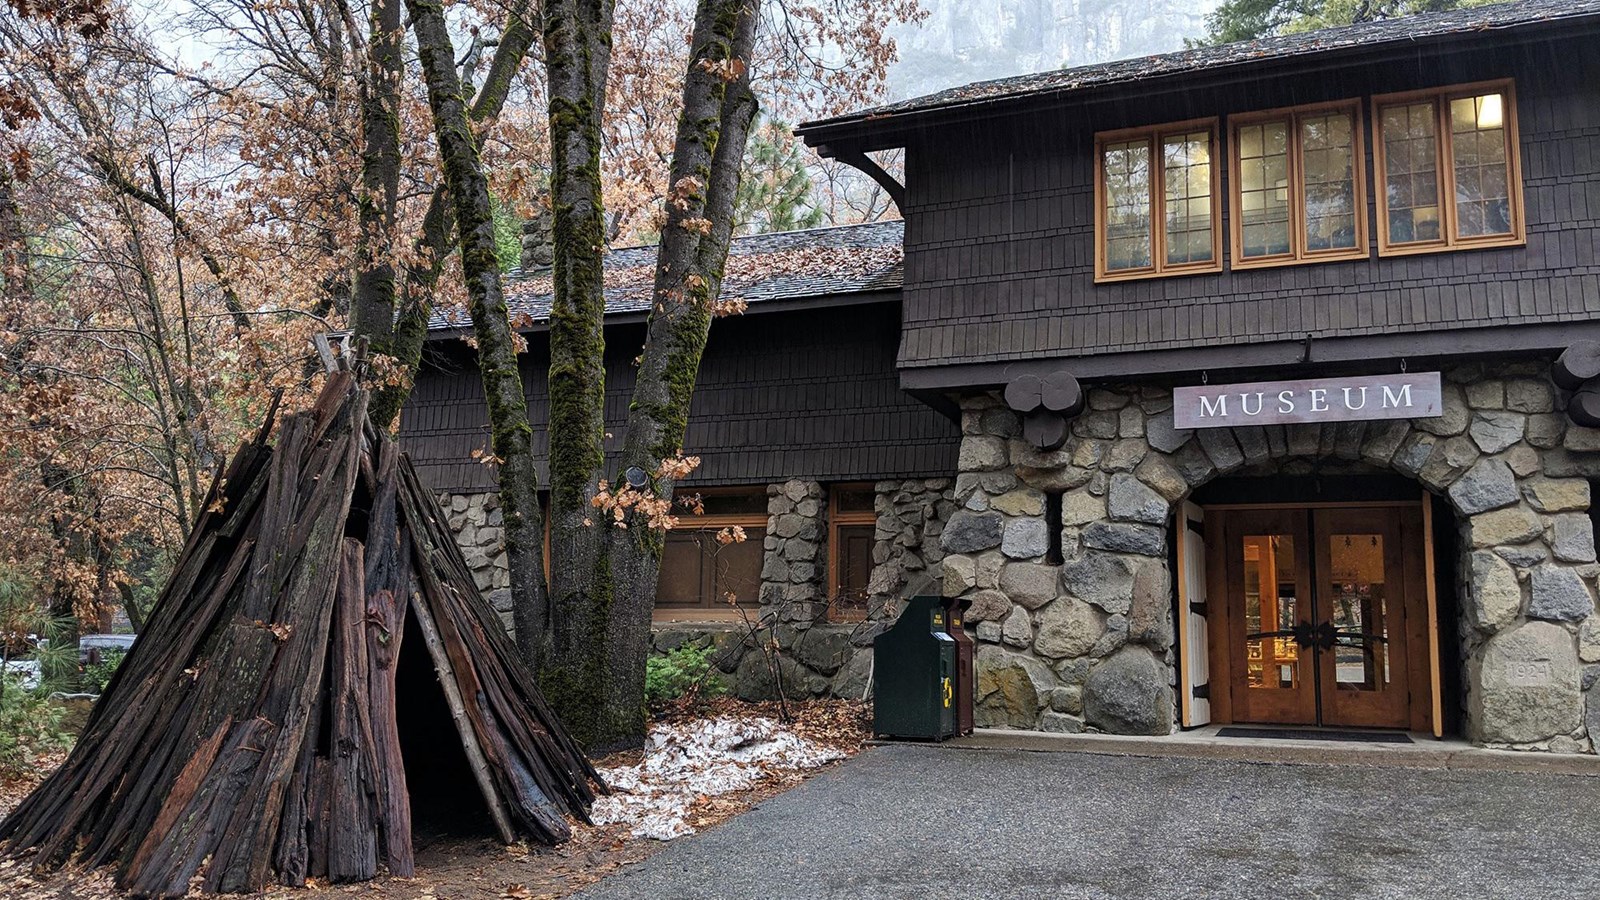 Yosemite Museum building with wood bark house to the left of the main door